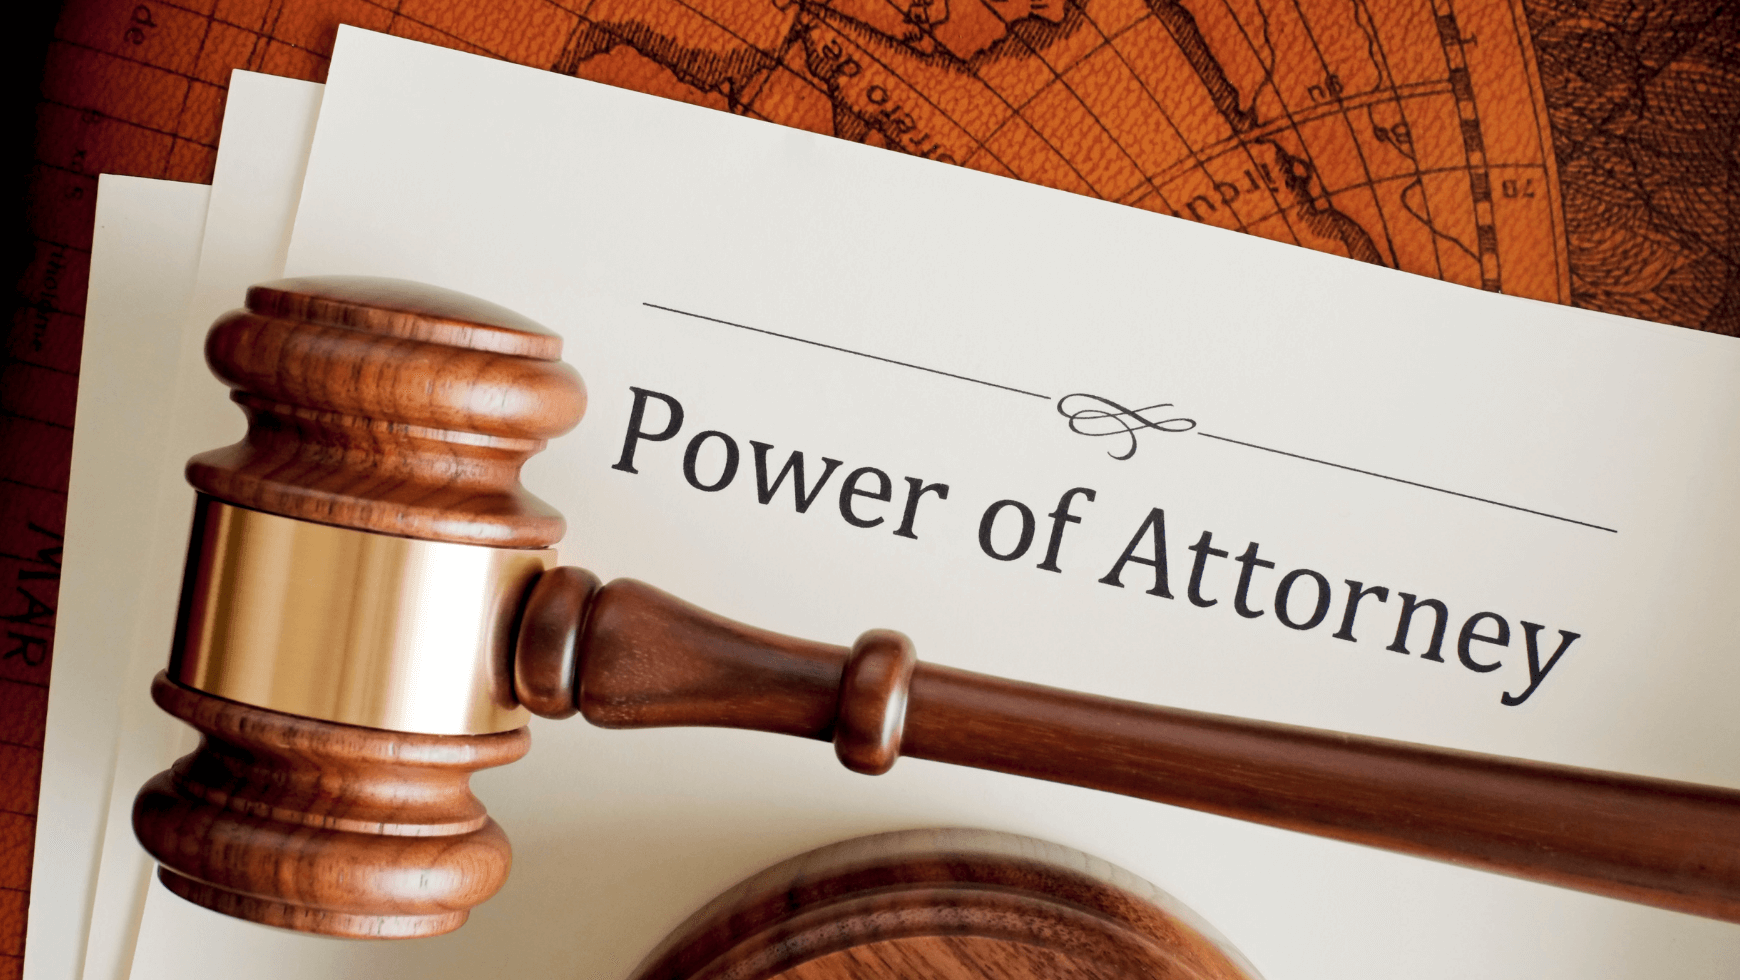 power of attorney in Hong Kong